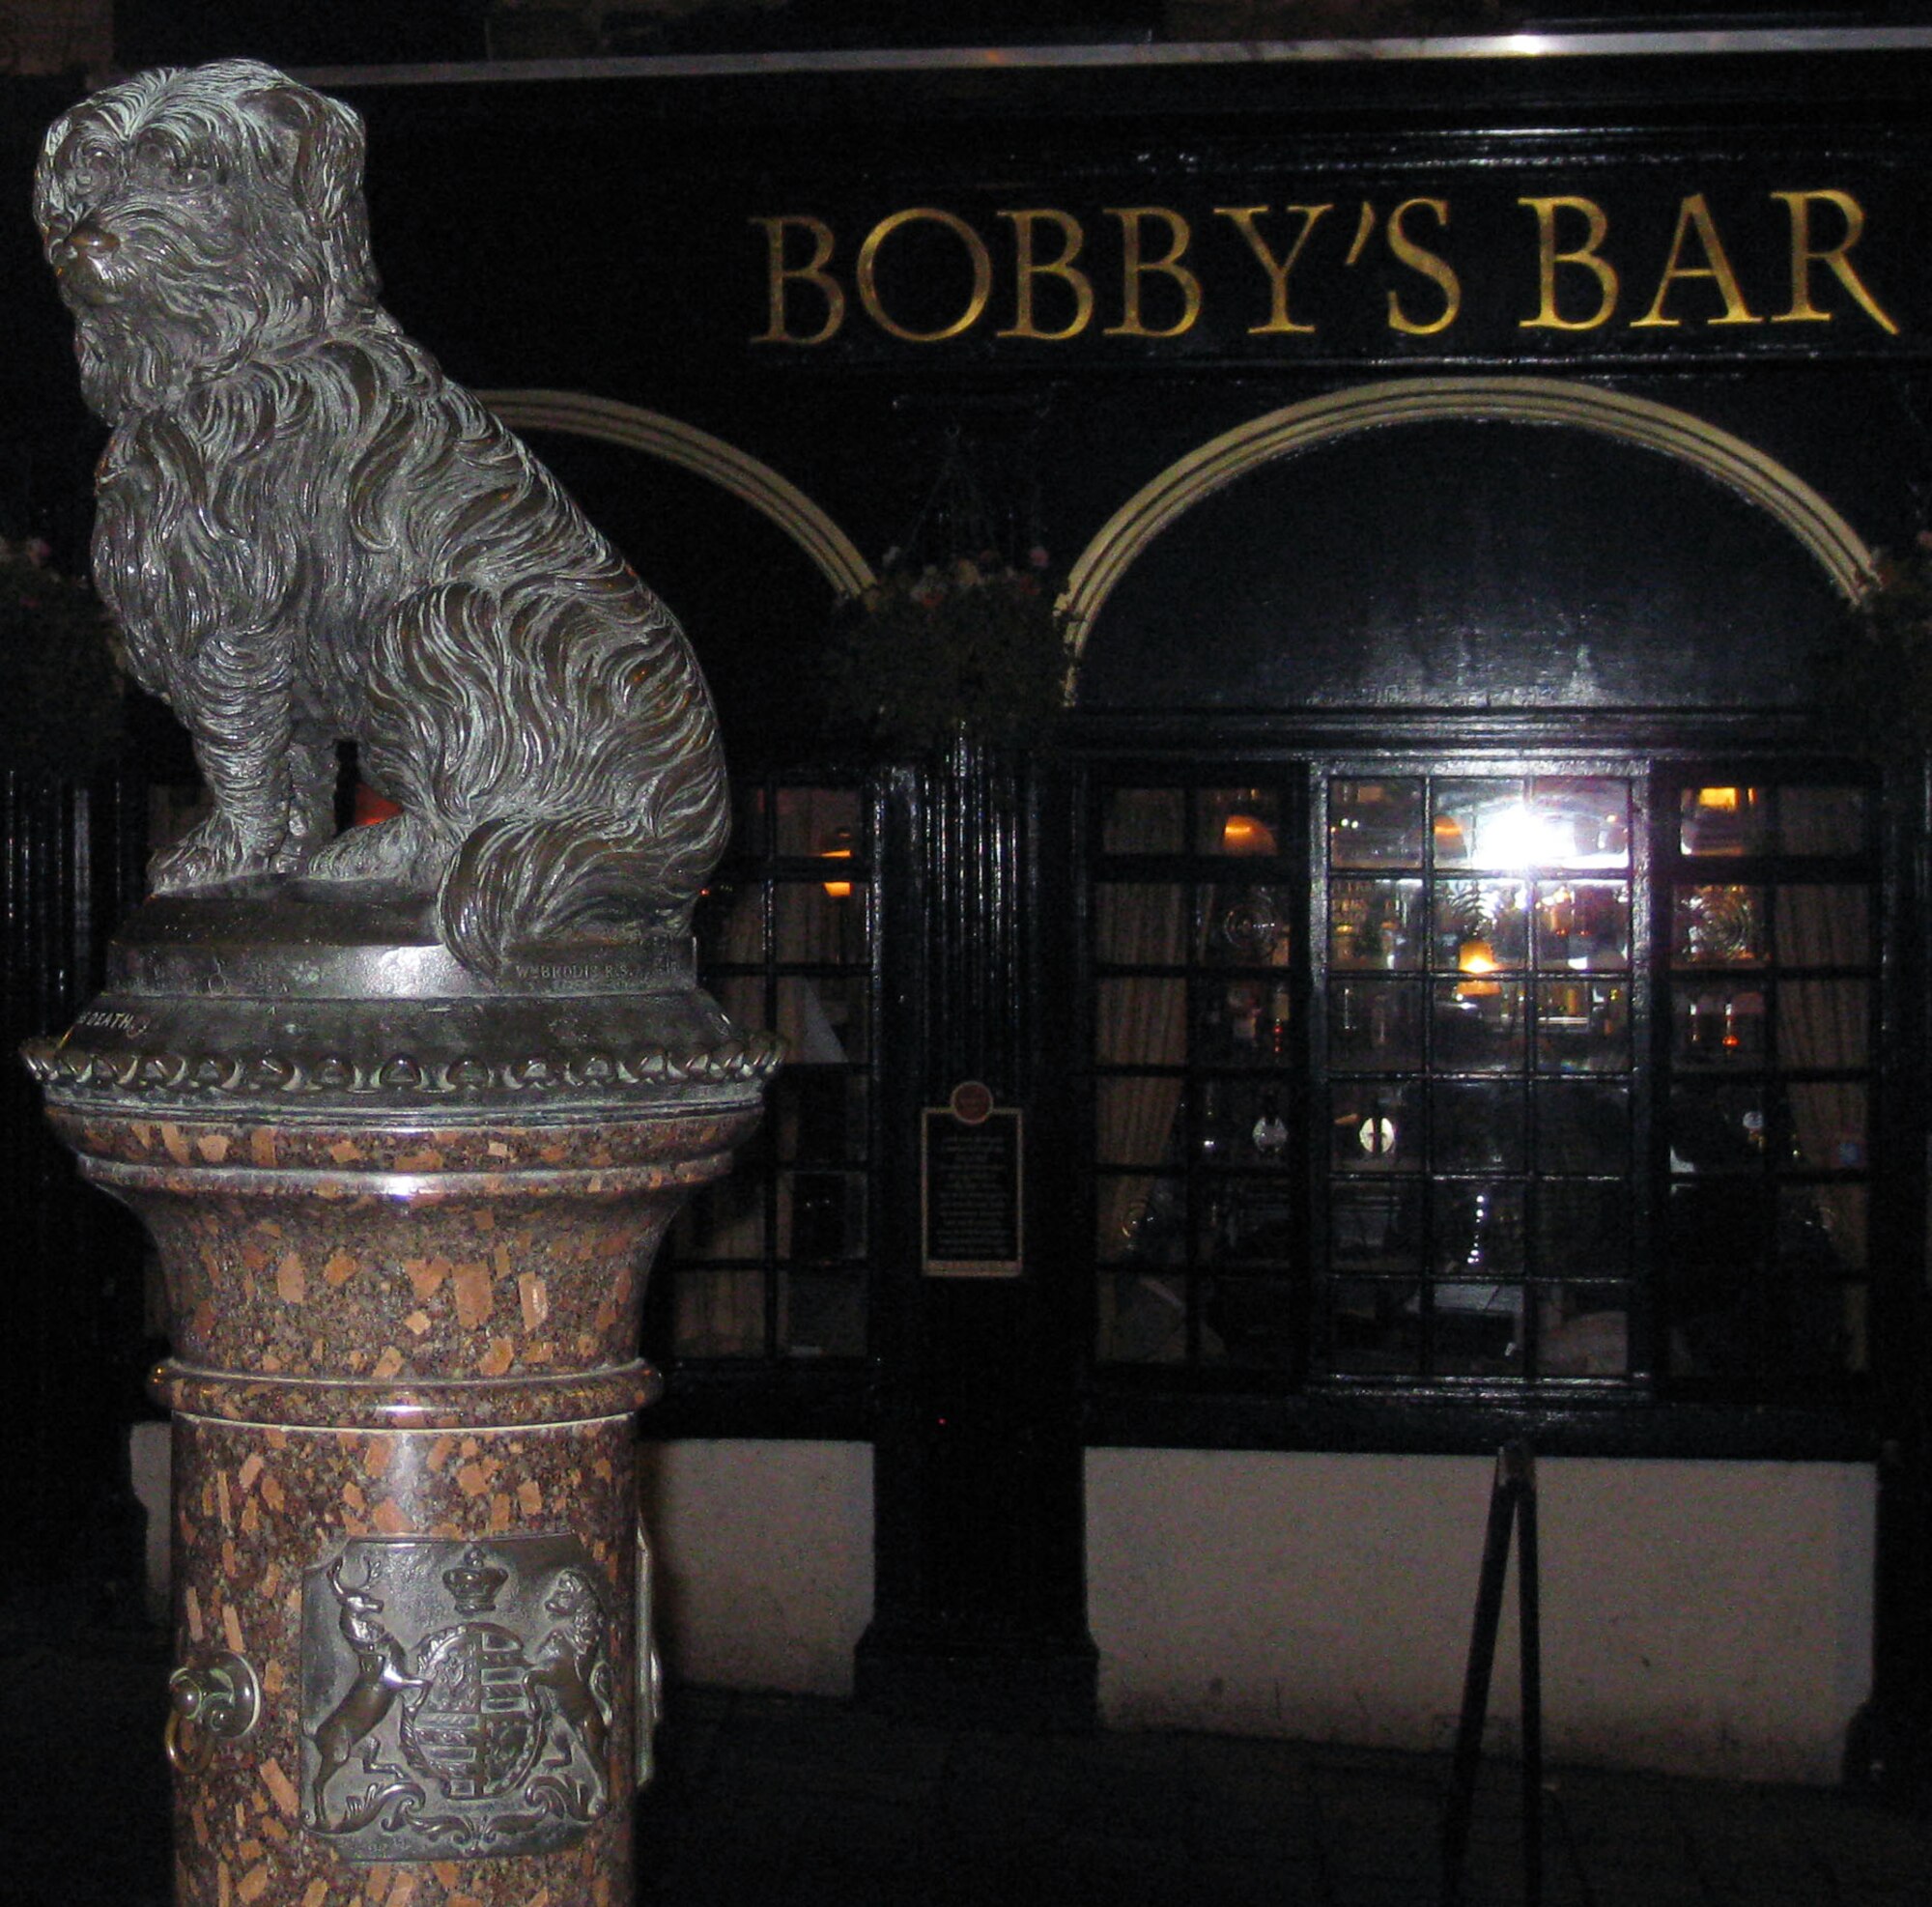 William Brodie sculpted this life-sized statue of Greyfriars Bobby, and it was unveiled without ceremony in November 1873, opposite Greyfriars Kirkyard. It sits at the corner of Edinburgh's Candlemaker Row and George IV Bridge so that Scotland’s capital city will always remember its most famous and faithful dog. (U.S. Air Force photo by Staff Sgt Megan Lyon)